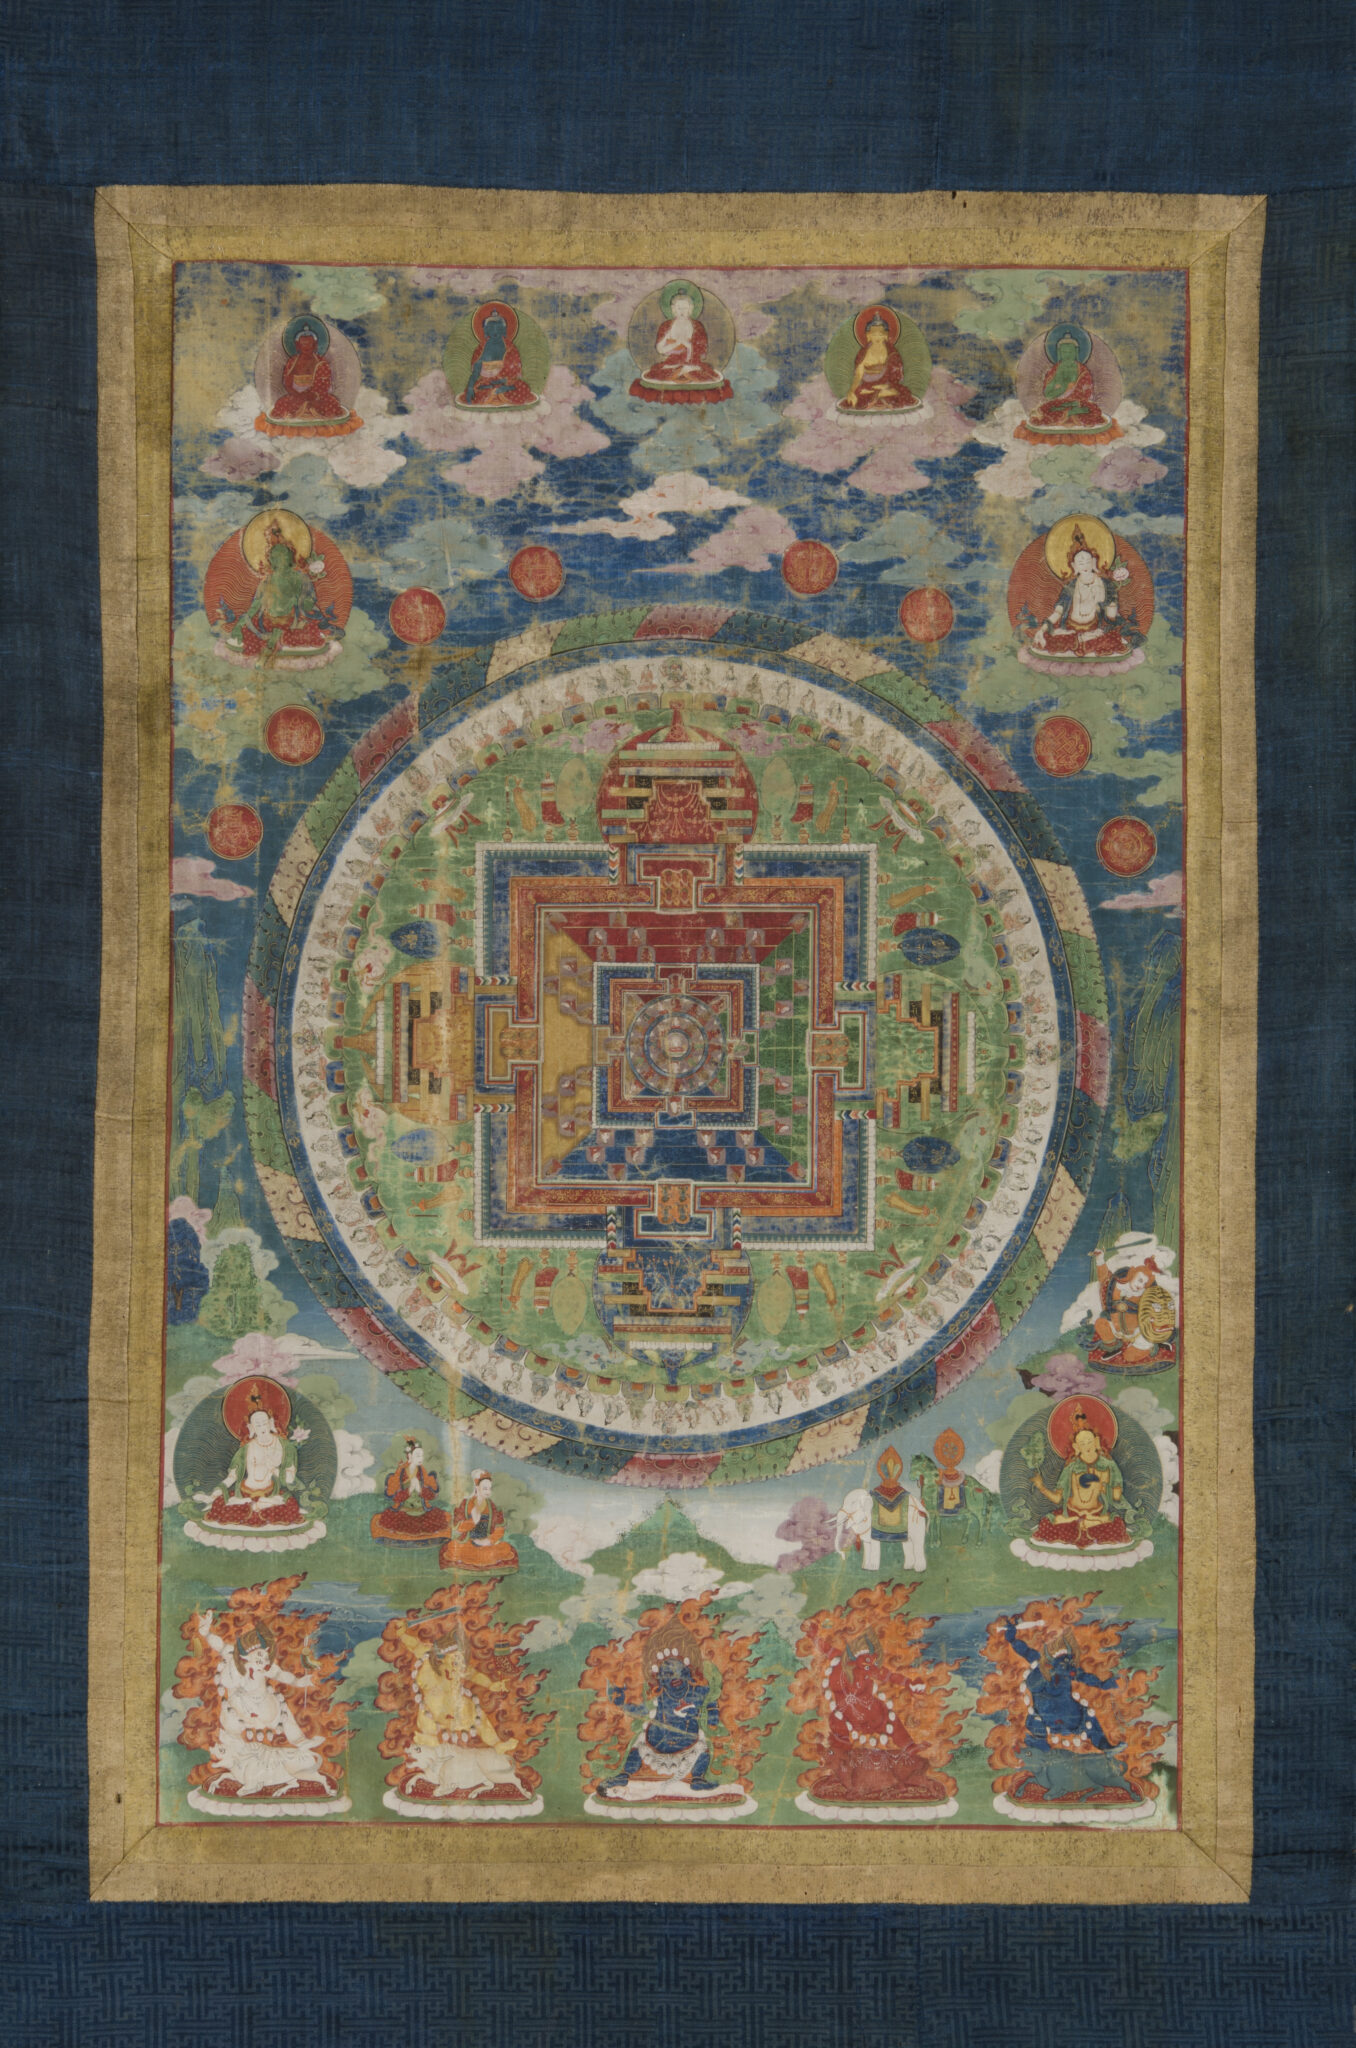 Mandala mounted on blue and gold textile border featuring deity portraits at bottom and background landscape